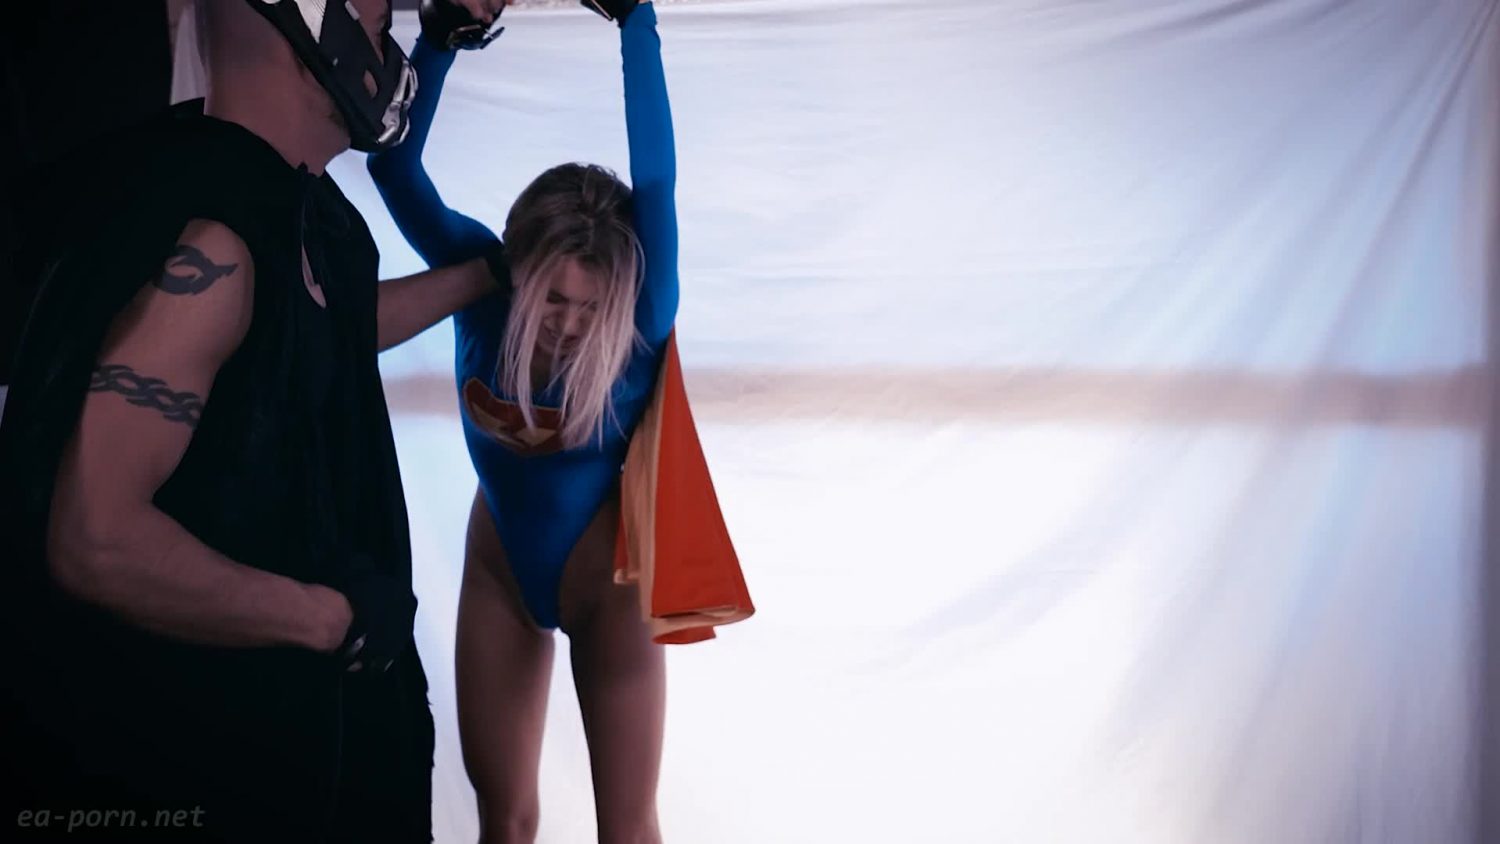 Superheroine Tbfe Free Watch - TBFE Broken - Cosplay Porn Videos with Women Warriors, Superheroine Sexy  Girls and other costume roleplay characters